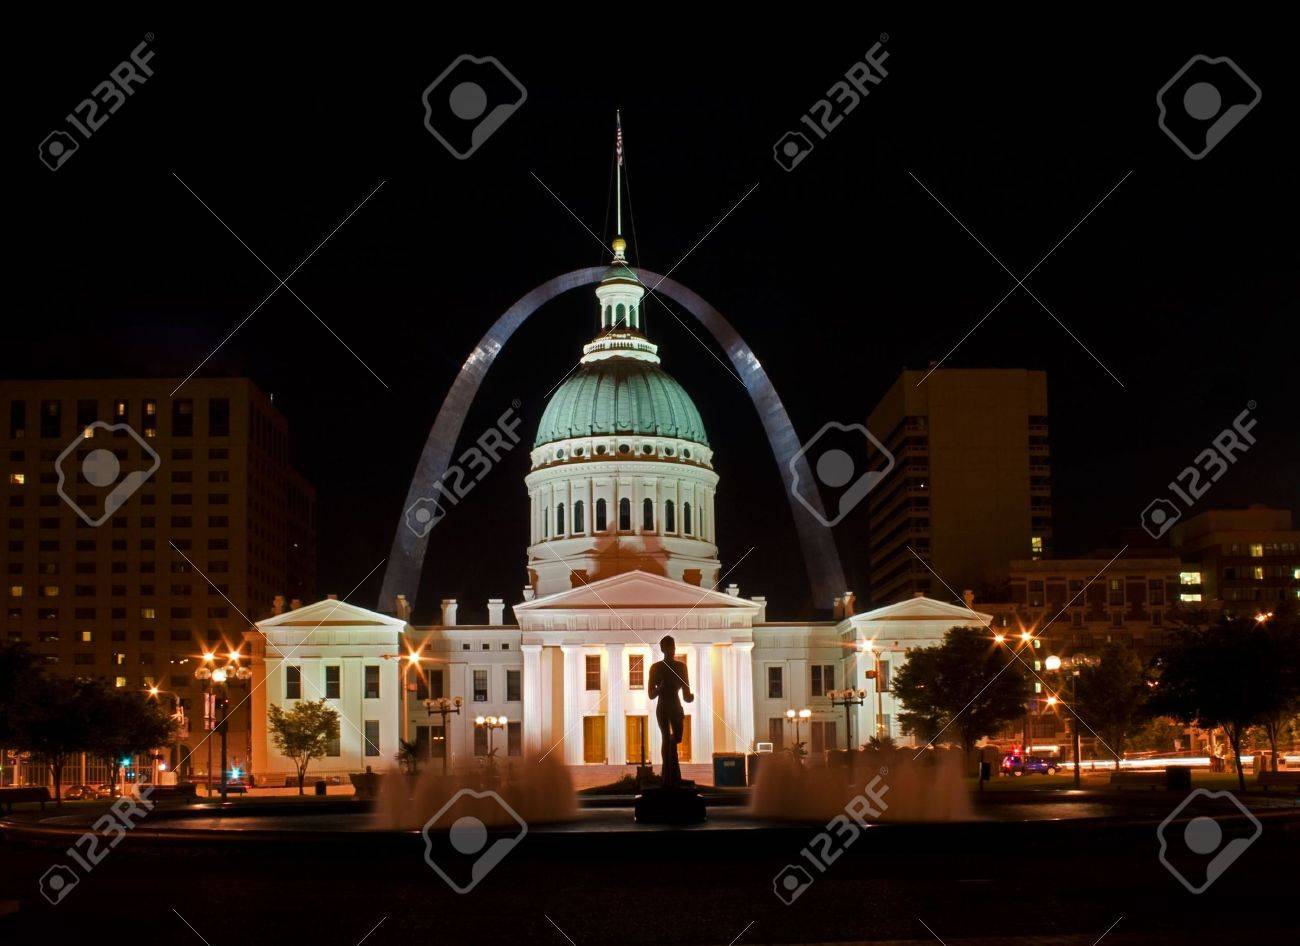 St Louis Old Court House At Night With Arch In The Background